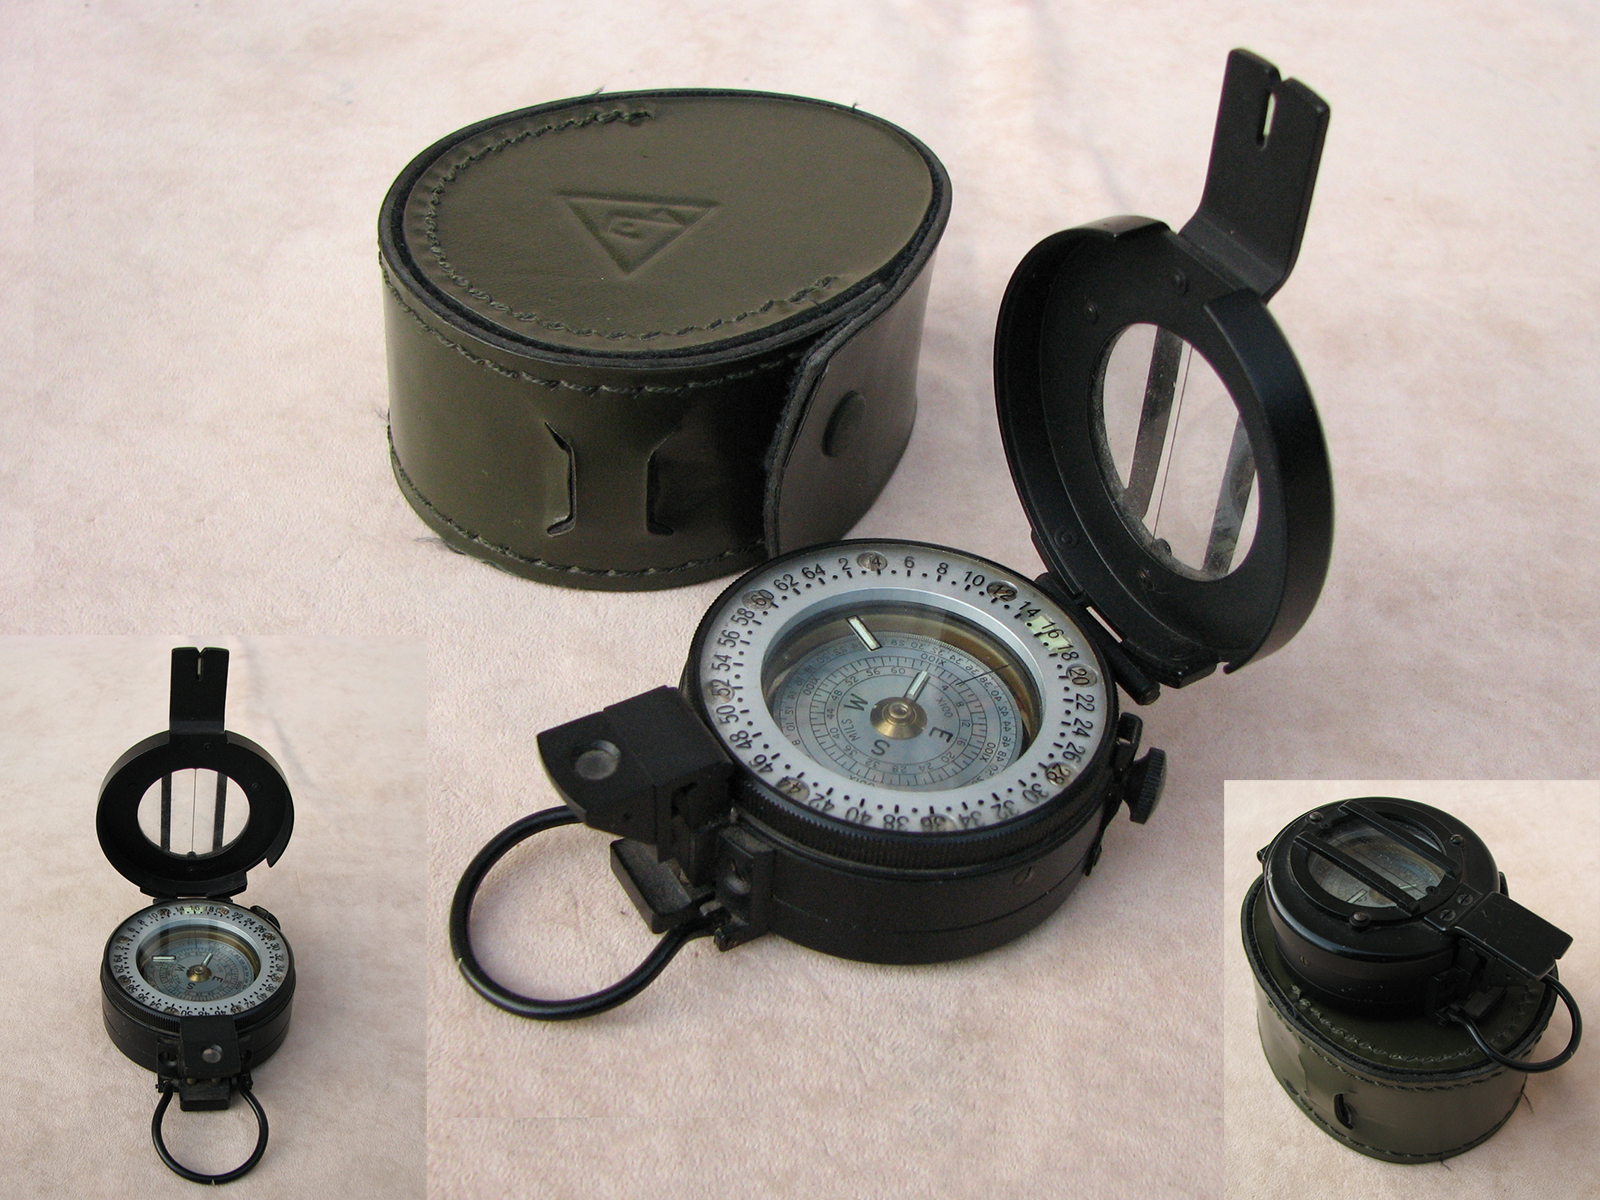 Francis Barker M-73 prismatic compass brought back from Gulf War